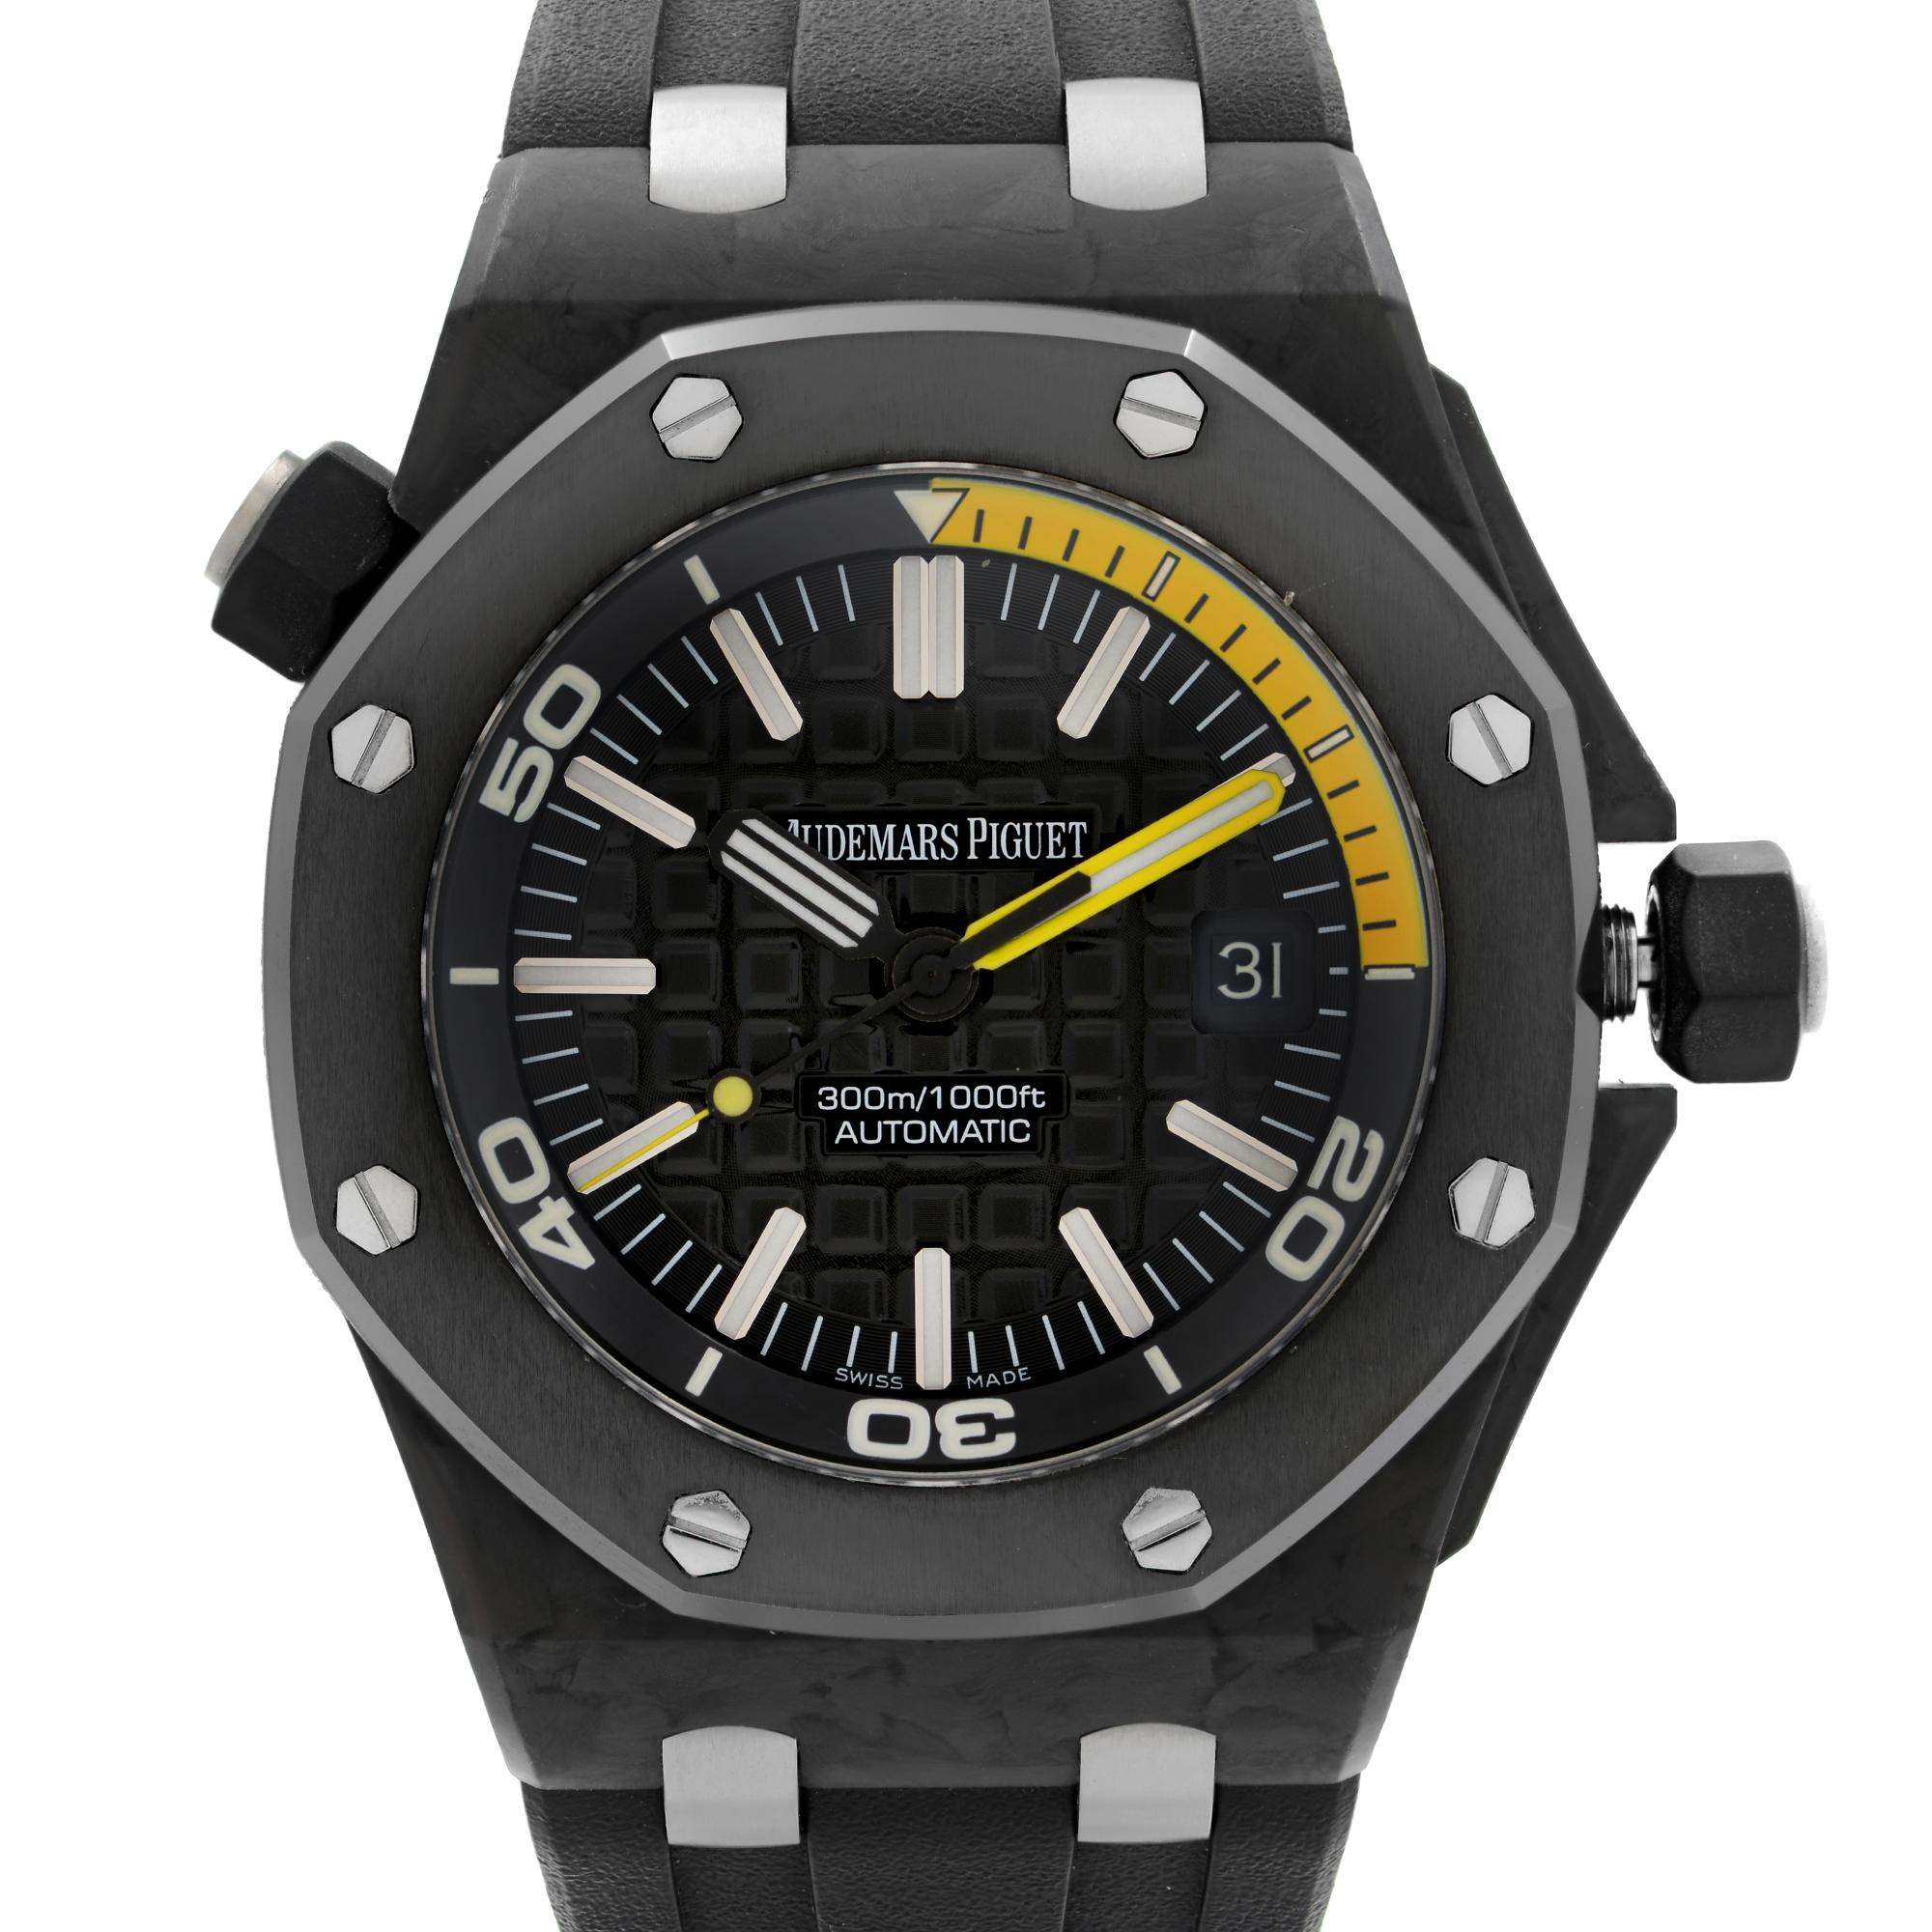 Pre Owned Audemars Piguet Royal Oak Offshore Diver Carbon Fiber Men's Automatic Watch 15706AU.OO.A002CA.01. This Beautiful Timepiece is Powered by Mechanical (Automatic) Movement And Features: Black Carbon Case with a Black Rubber Strap, Fixed Black